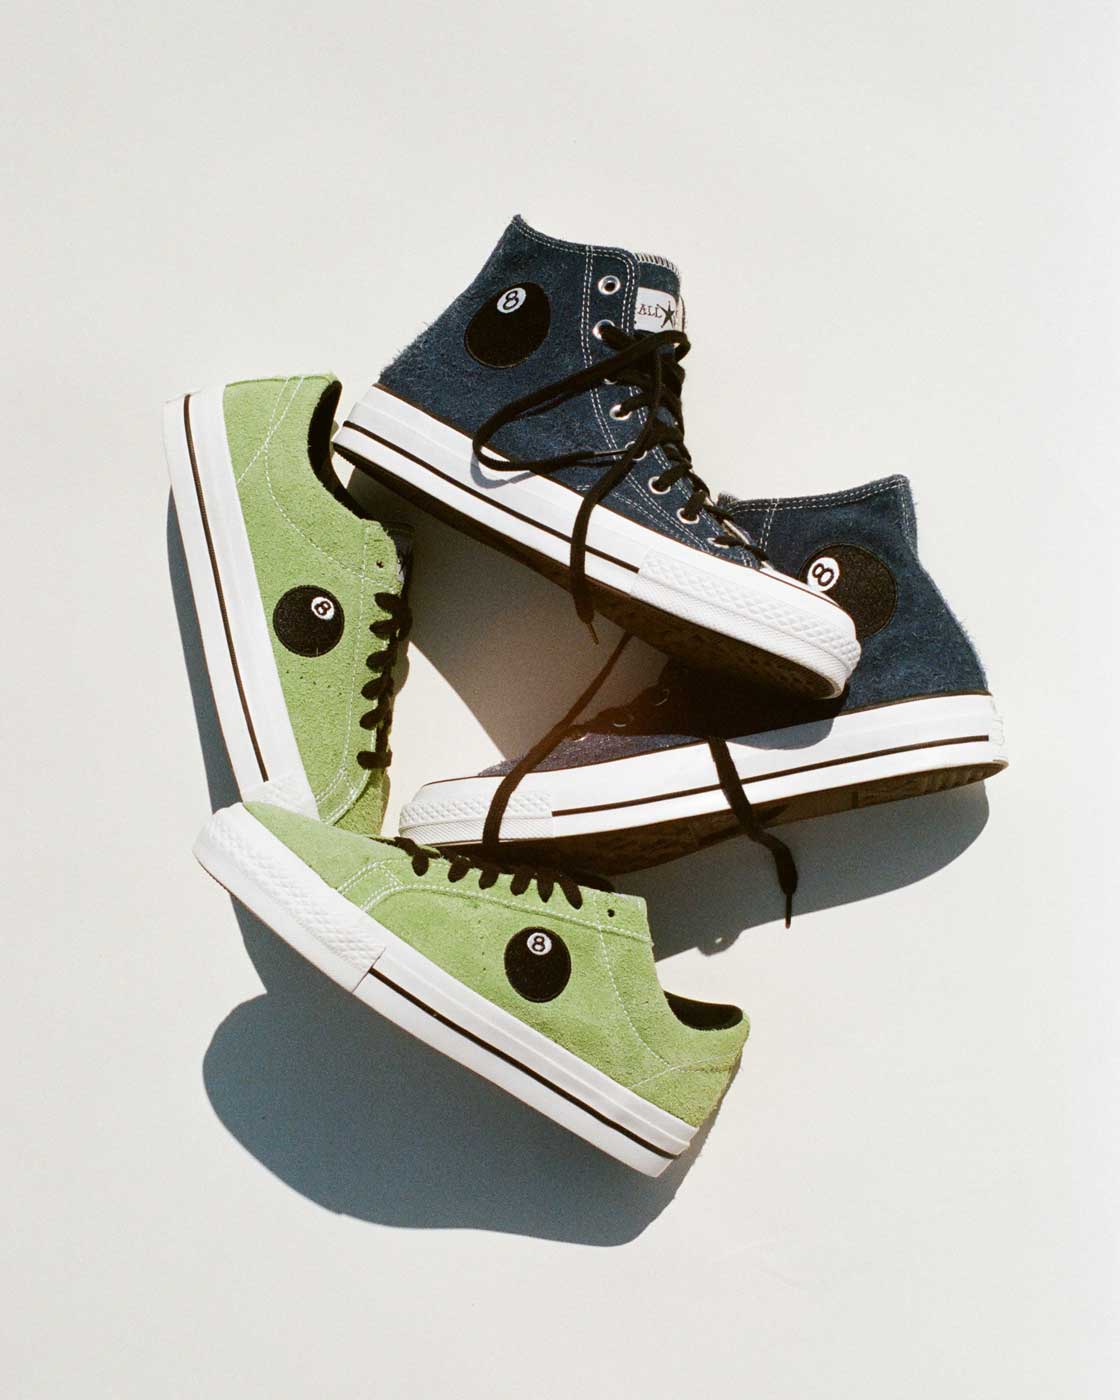 Stüssy's 8-Ball Fever Continues With Converse Sneakers